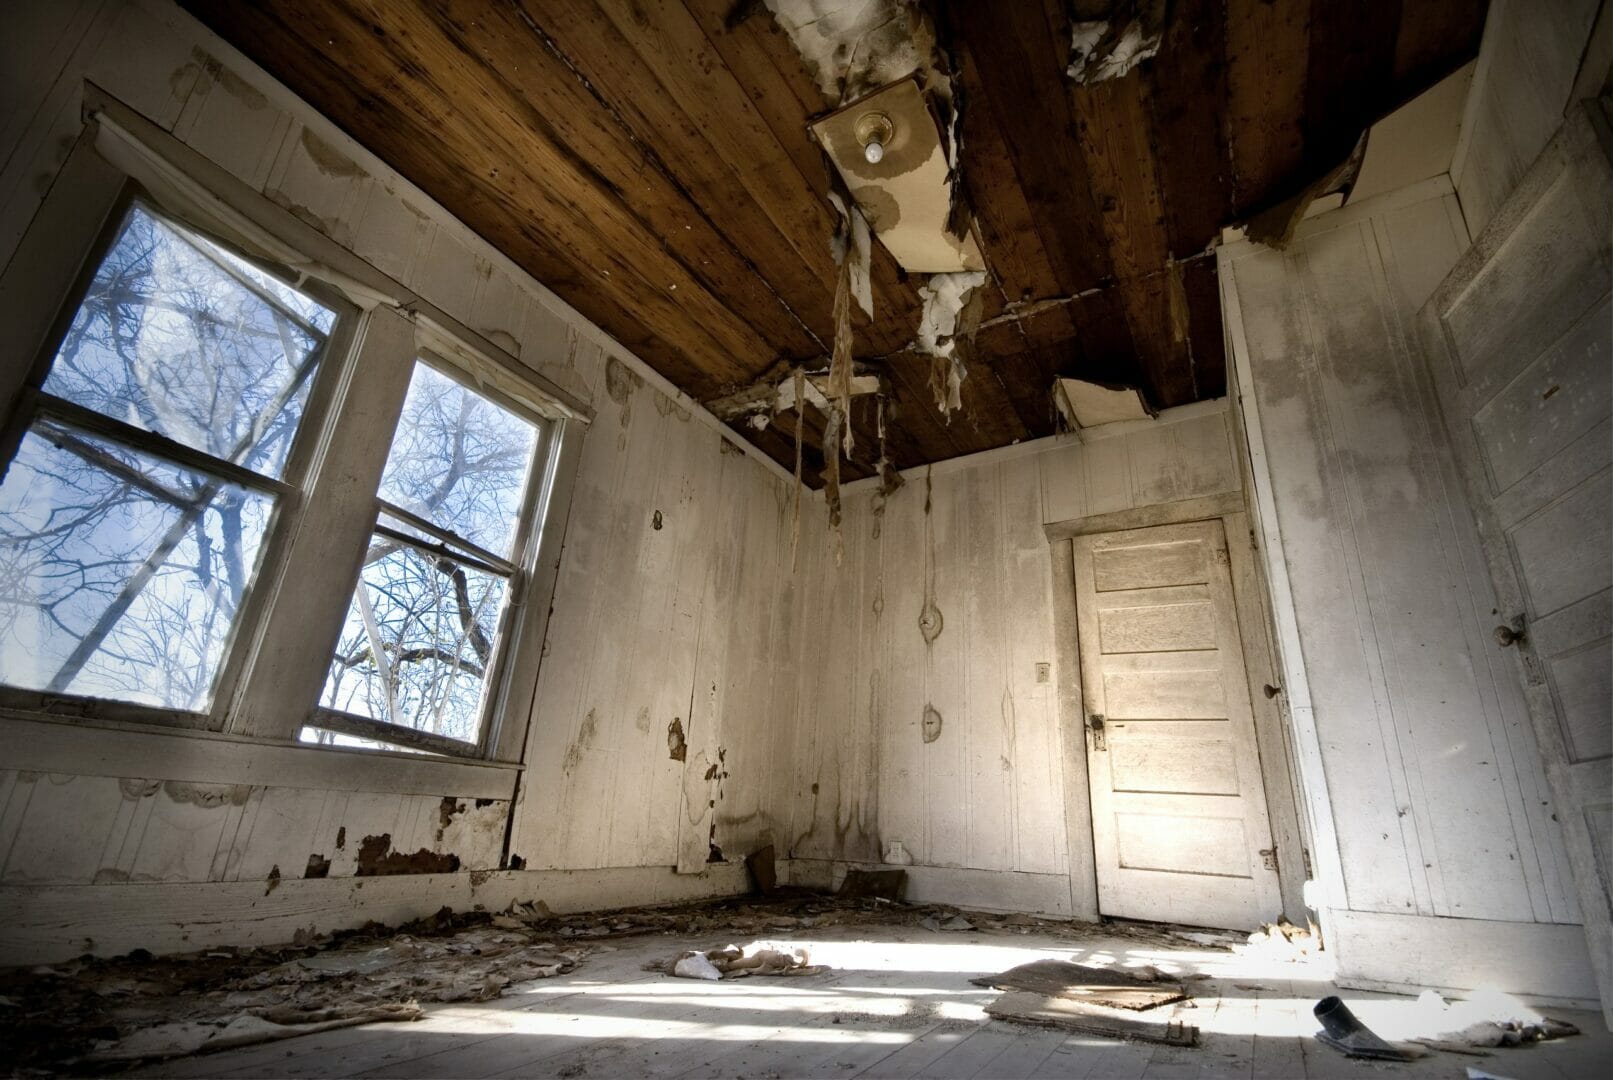 Top 10 Scariest Home Improvement Jobs According to Homeowners